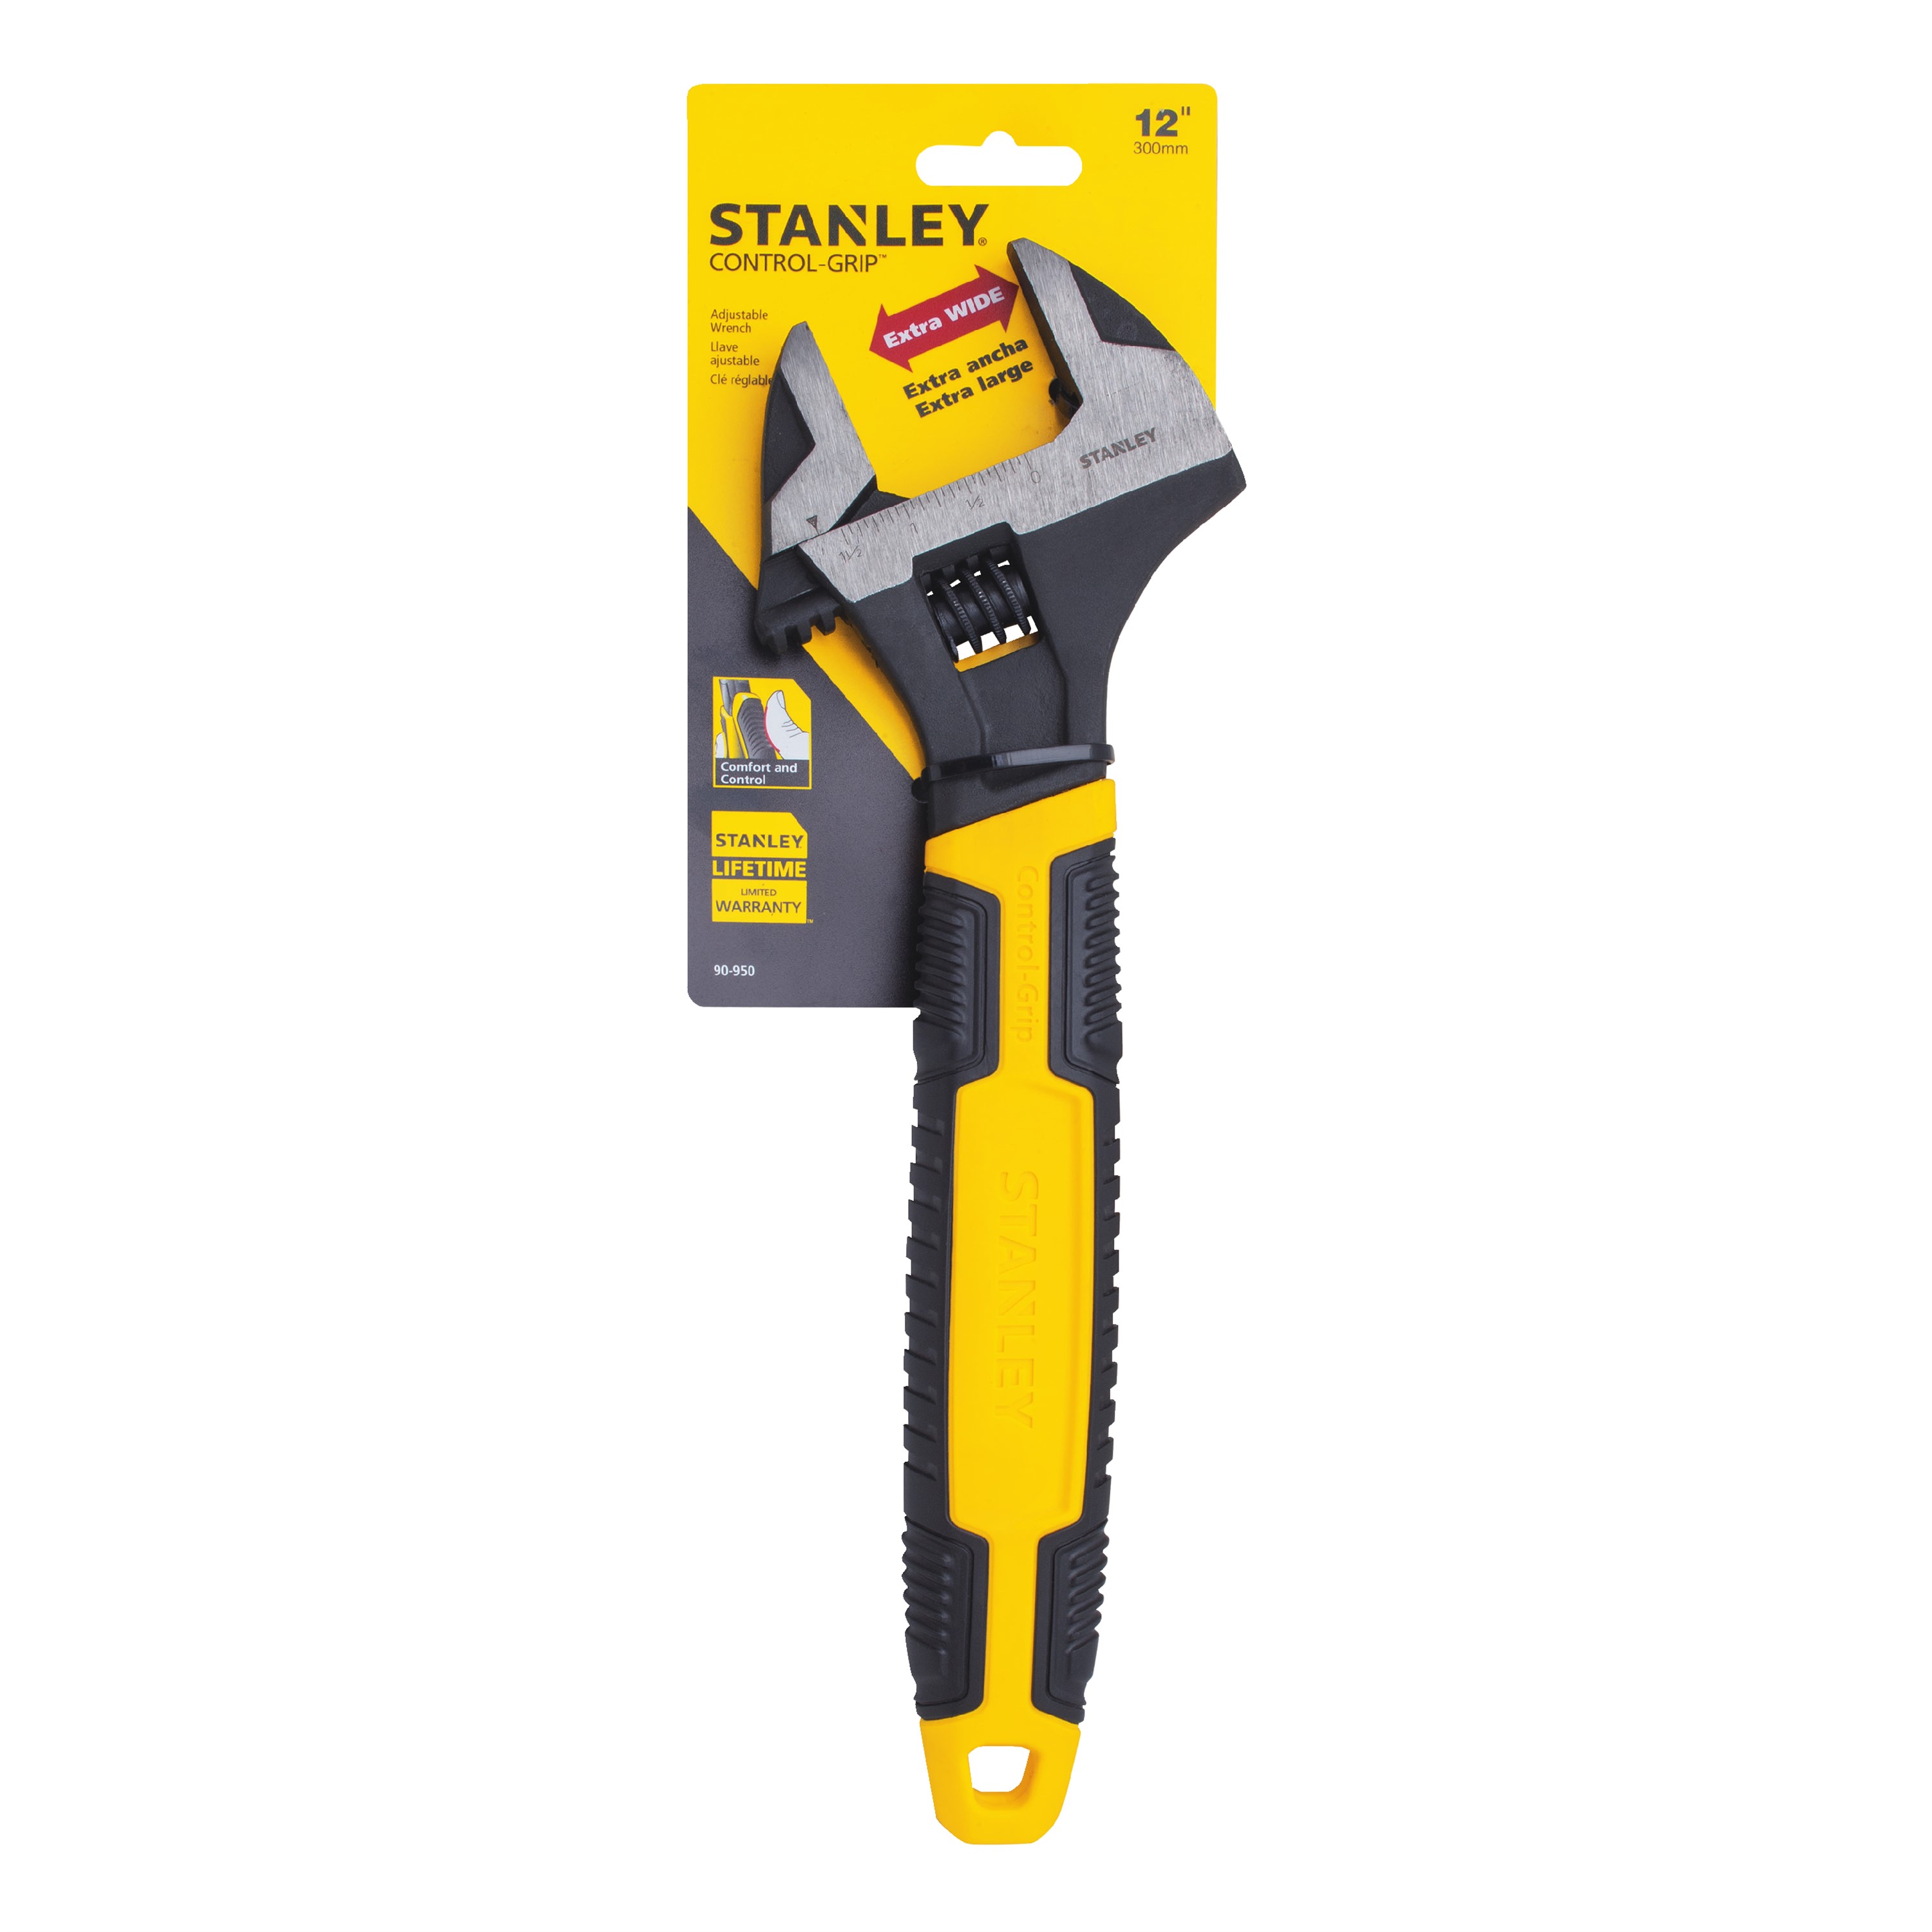 STANLEY 90-950 12" Adjustable Wrench - image 1 of 3